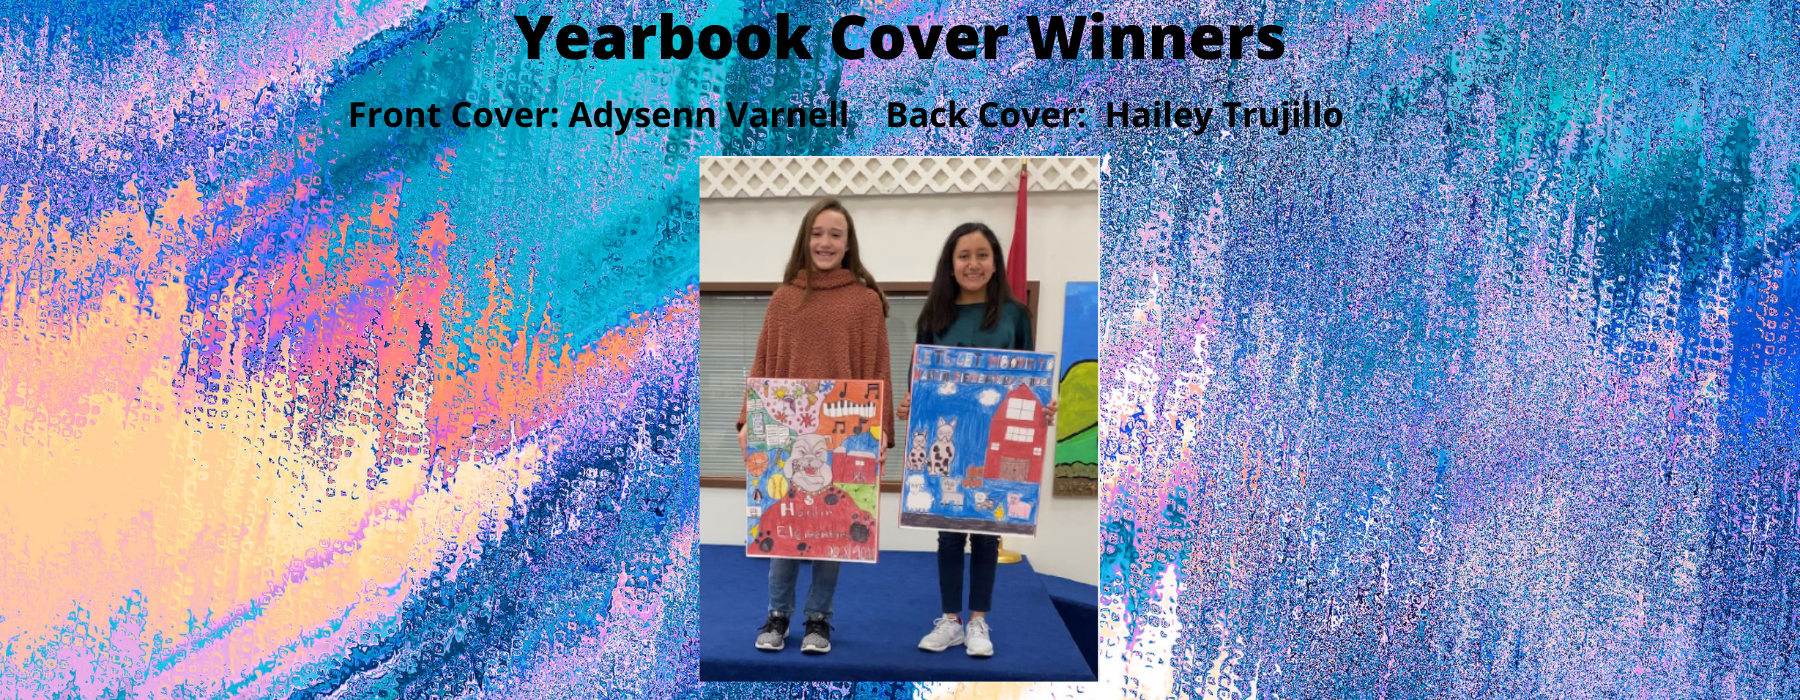 Yearbook Cover Winners